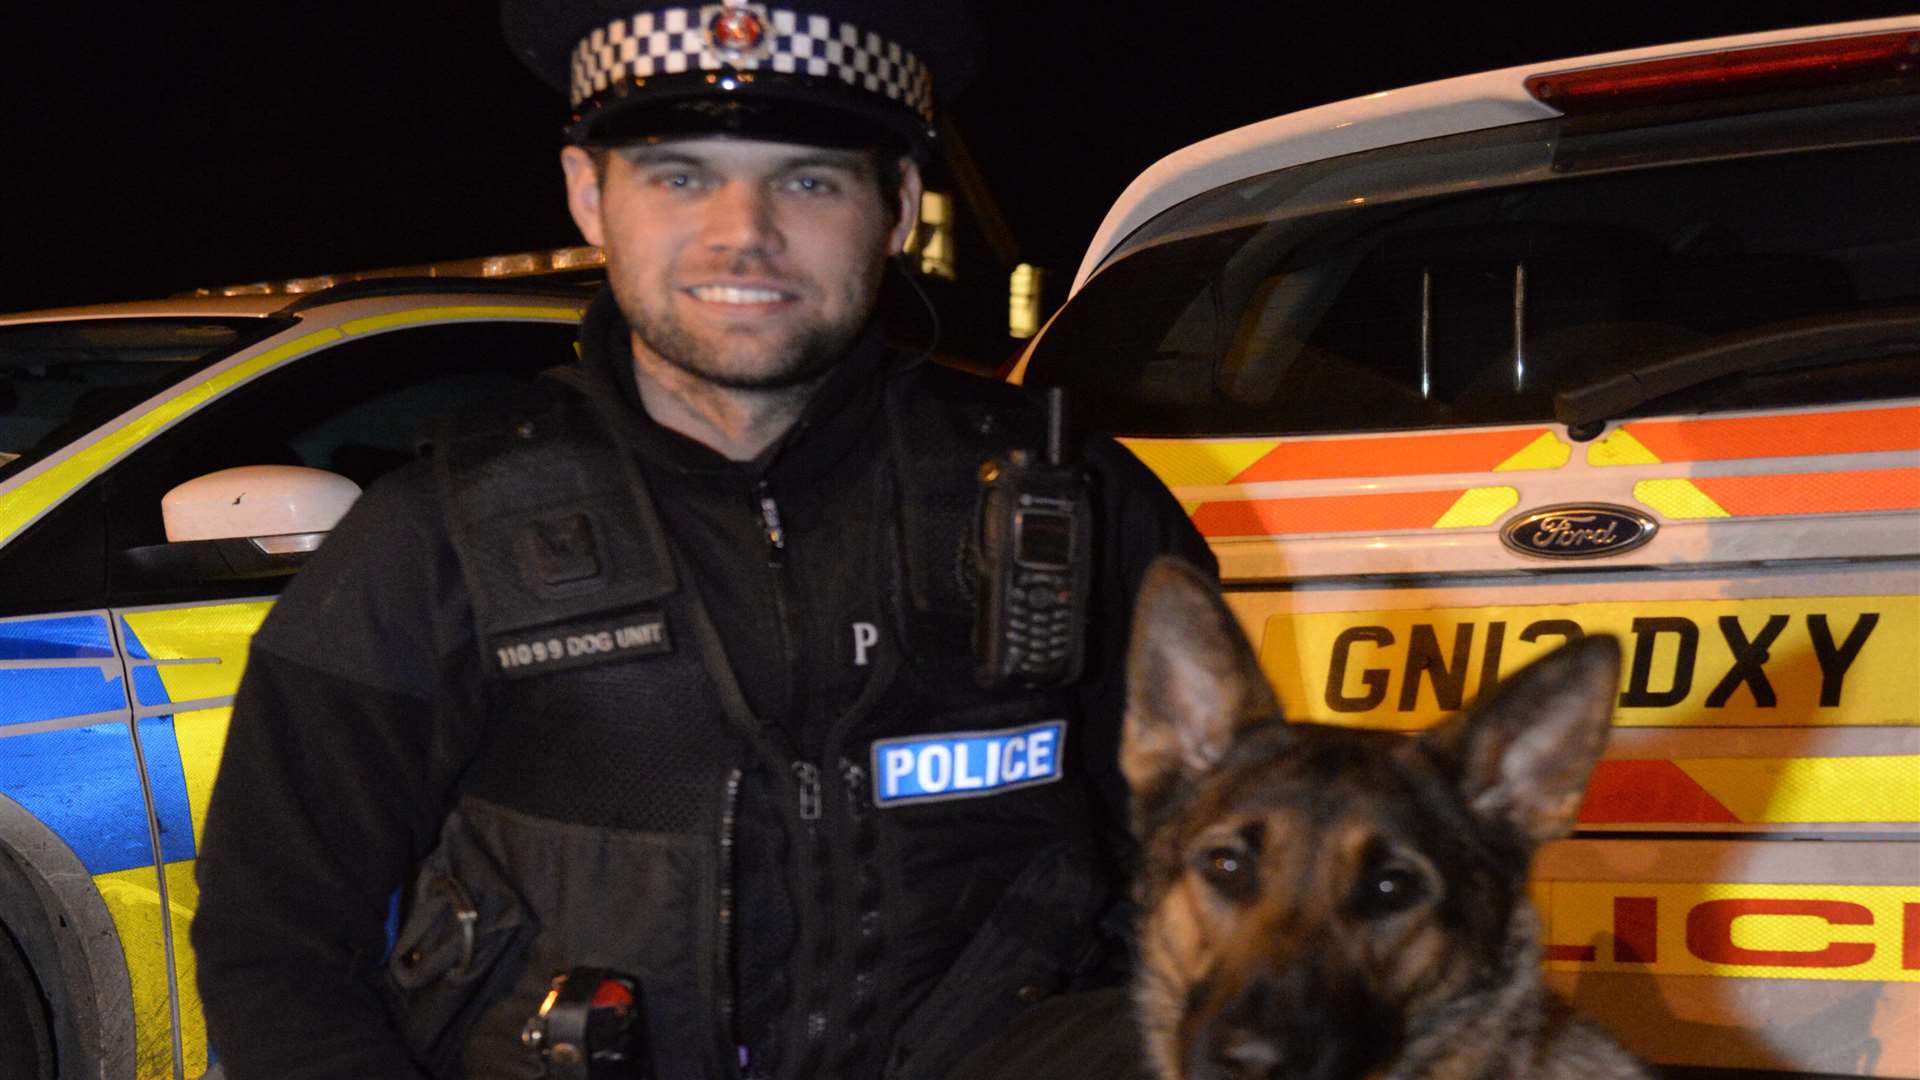 PC Paul Bassett and his dog Piper